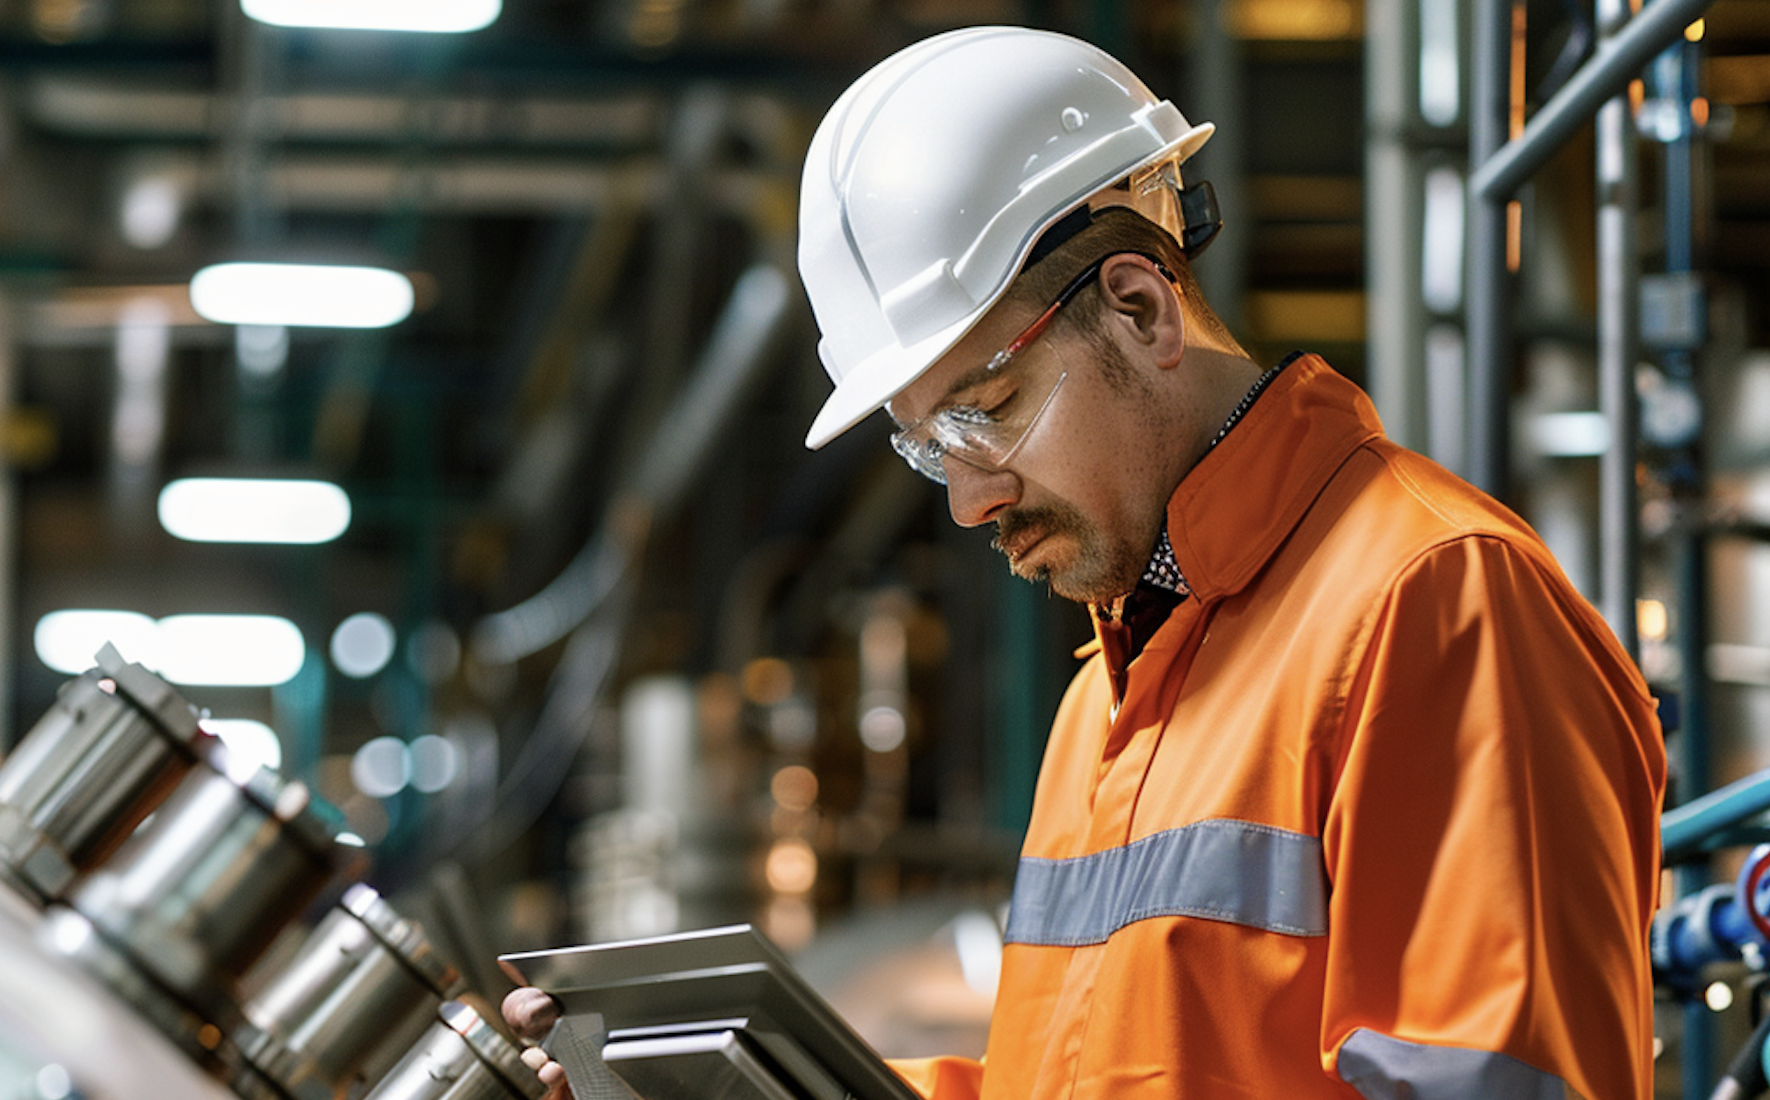 How To Conduct A Machinery Inspection To Prevent Safety Hazards Using Cumulus Pro